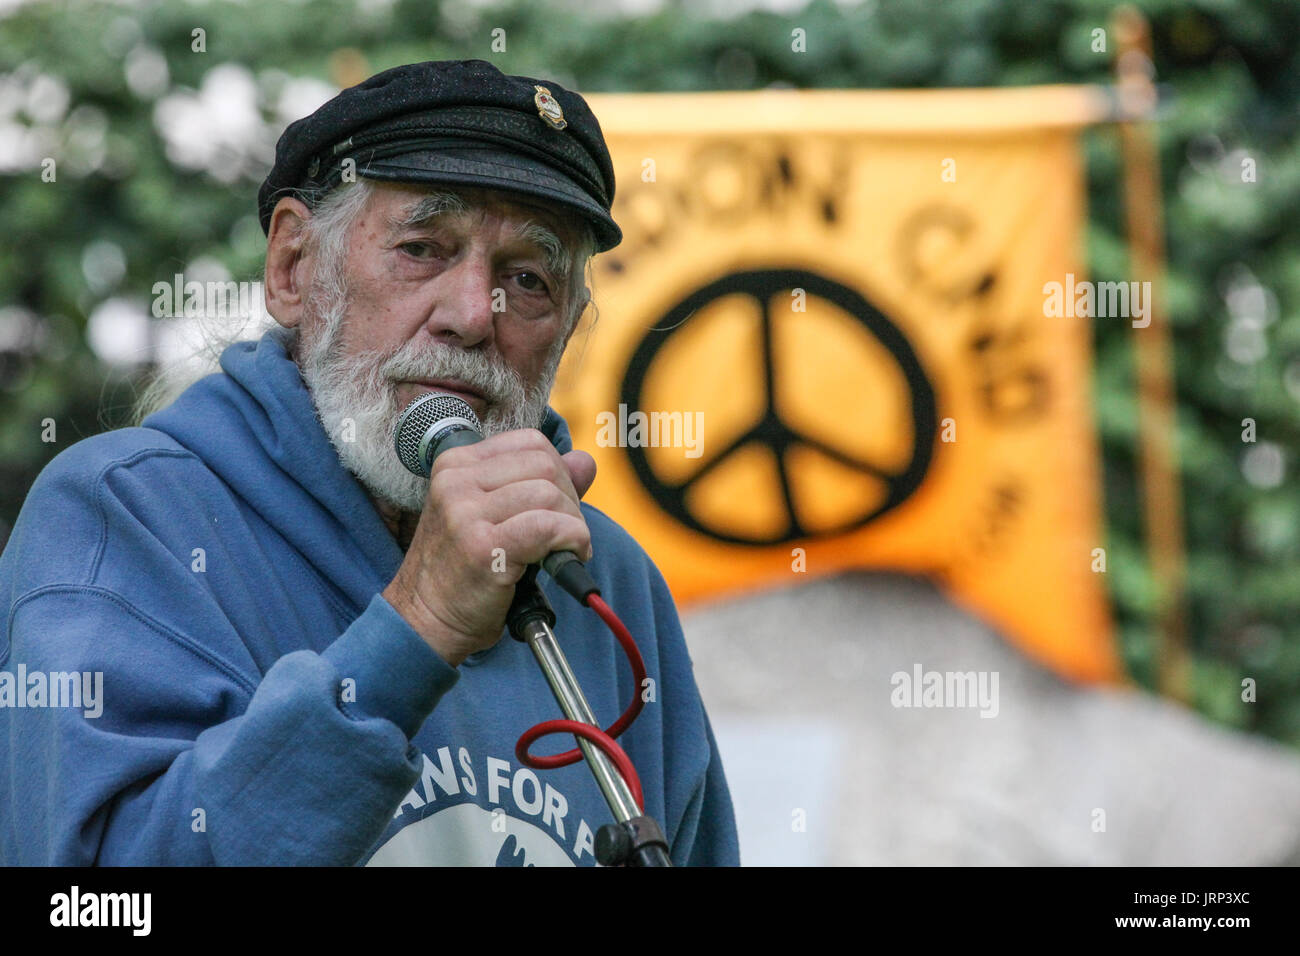 London, UK. 6th August, 2017. Jim Radford, D-Day veteran, folk singer and peace campaigner with Veterans for Peace, addresses peace campaigners attending the annual Hiroshima Day anniversary event in Tavistock Square, next to the commemorative Hiroshima cherry tree. Credit: Mark Kerrison/Alamy Live News Stock Photo